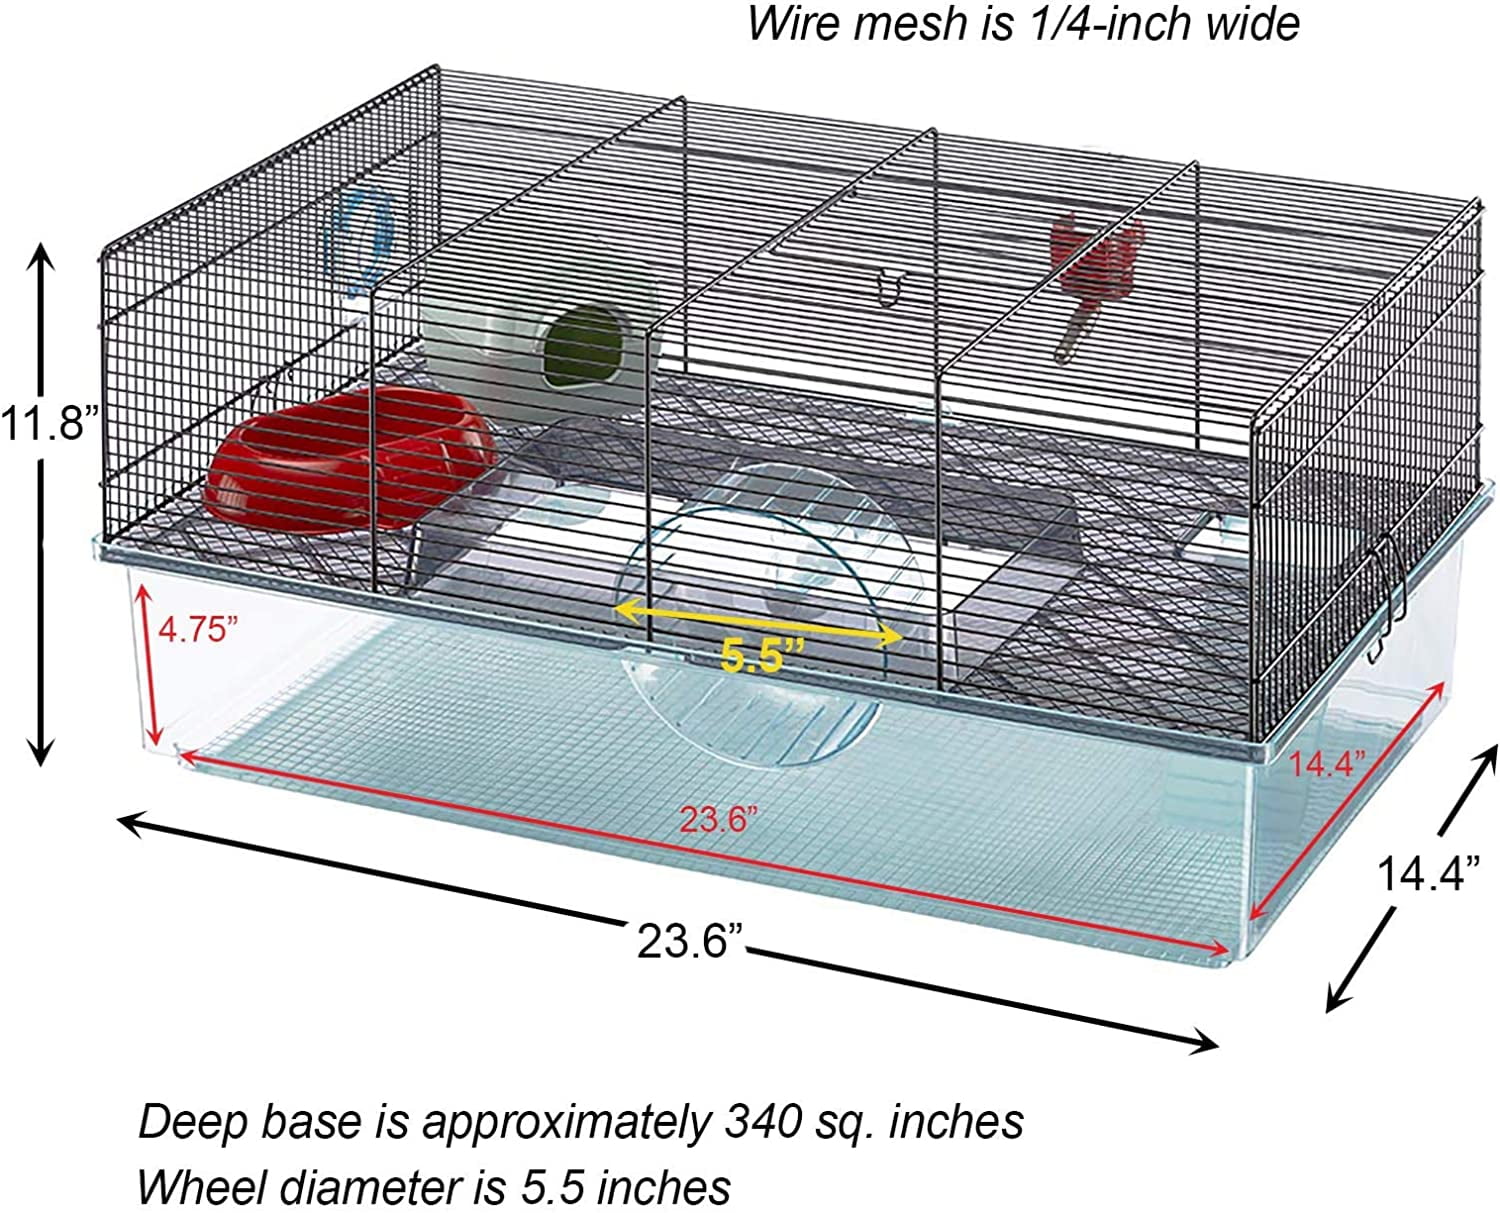 Favola Hamster Cage Includes Free Water Bottle, Exercise Wheel, Food Dish & Hamster Hide-Out Large Hamster Cage Measures 23.6L x 14.4W x 11.8H-Inches & Includes Manufacturer's Warranty - Walmart.com